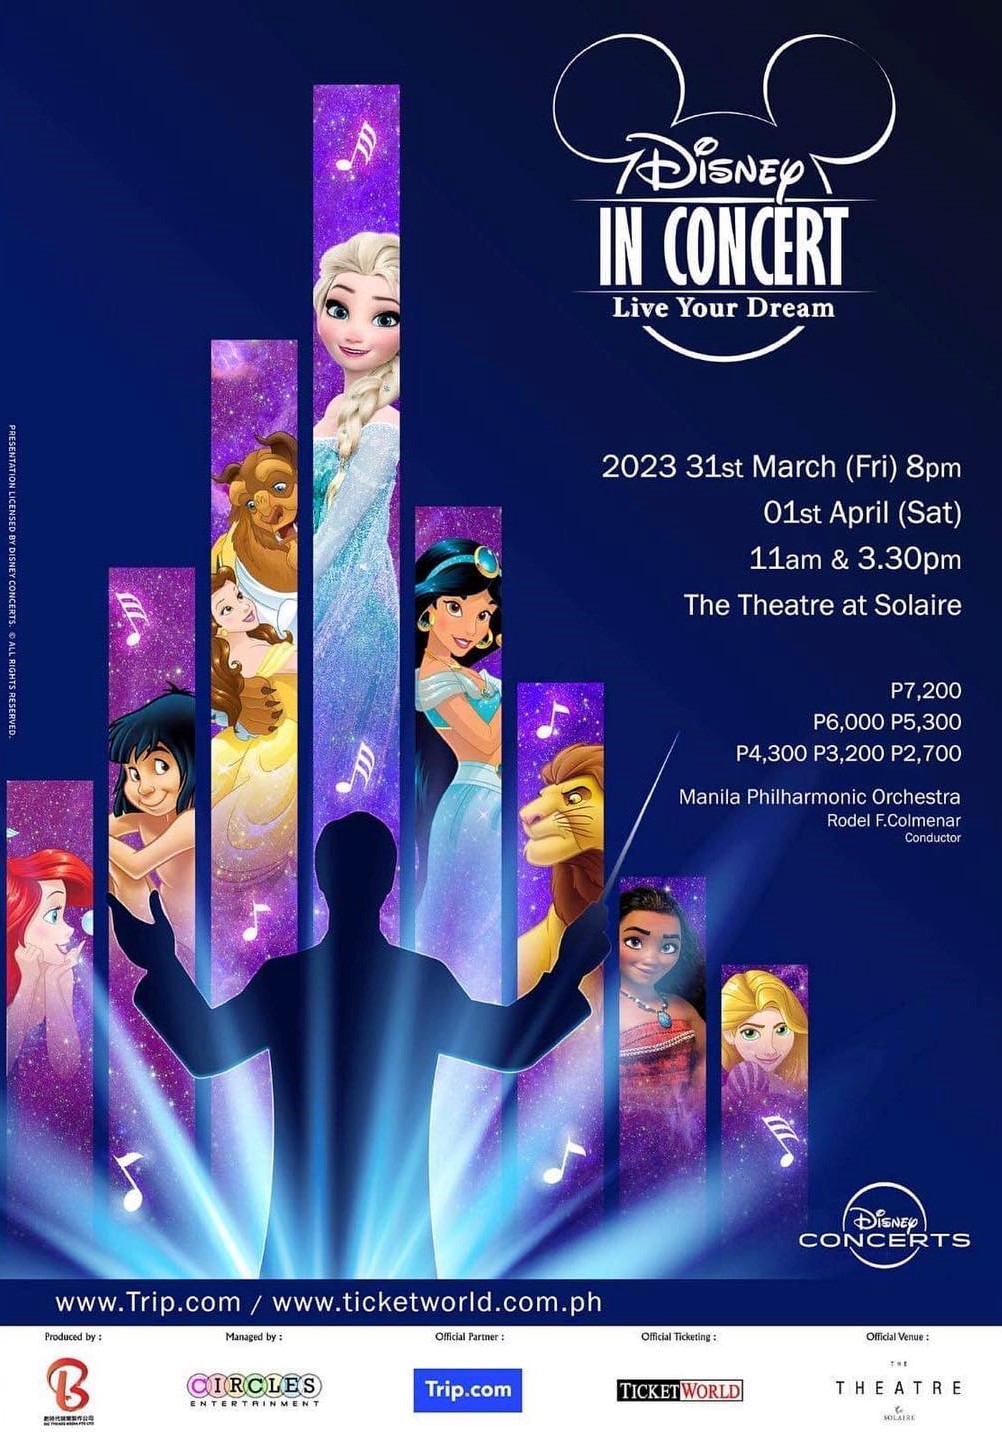 Things to do March 2023 - Disney In Concert Live Your Dream